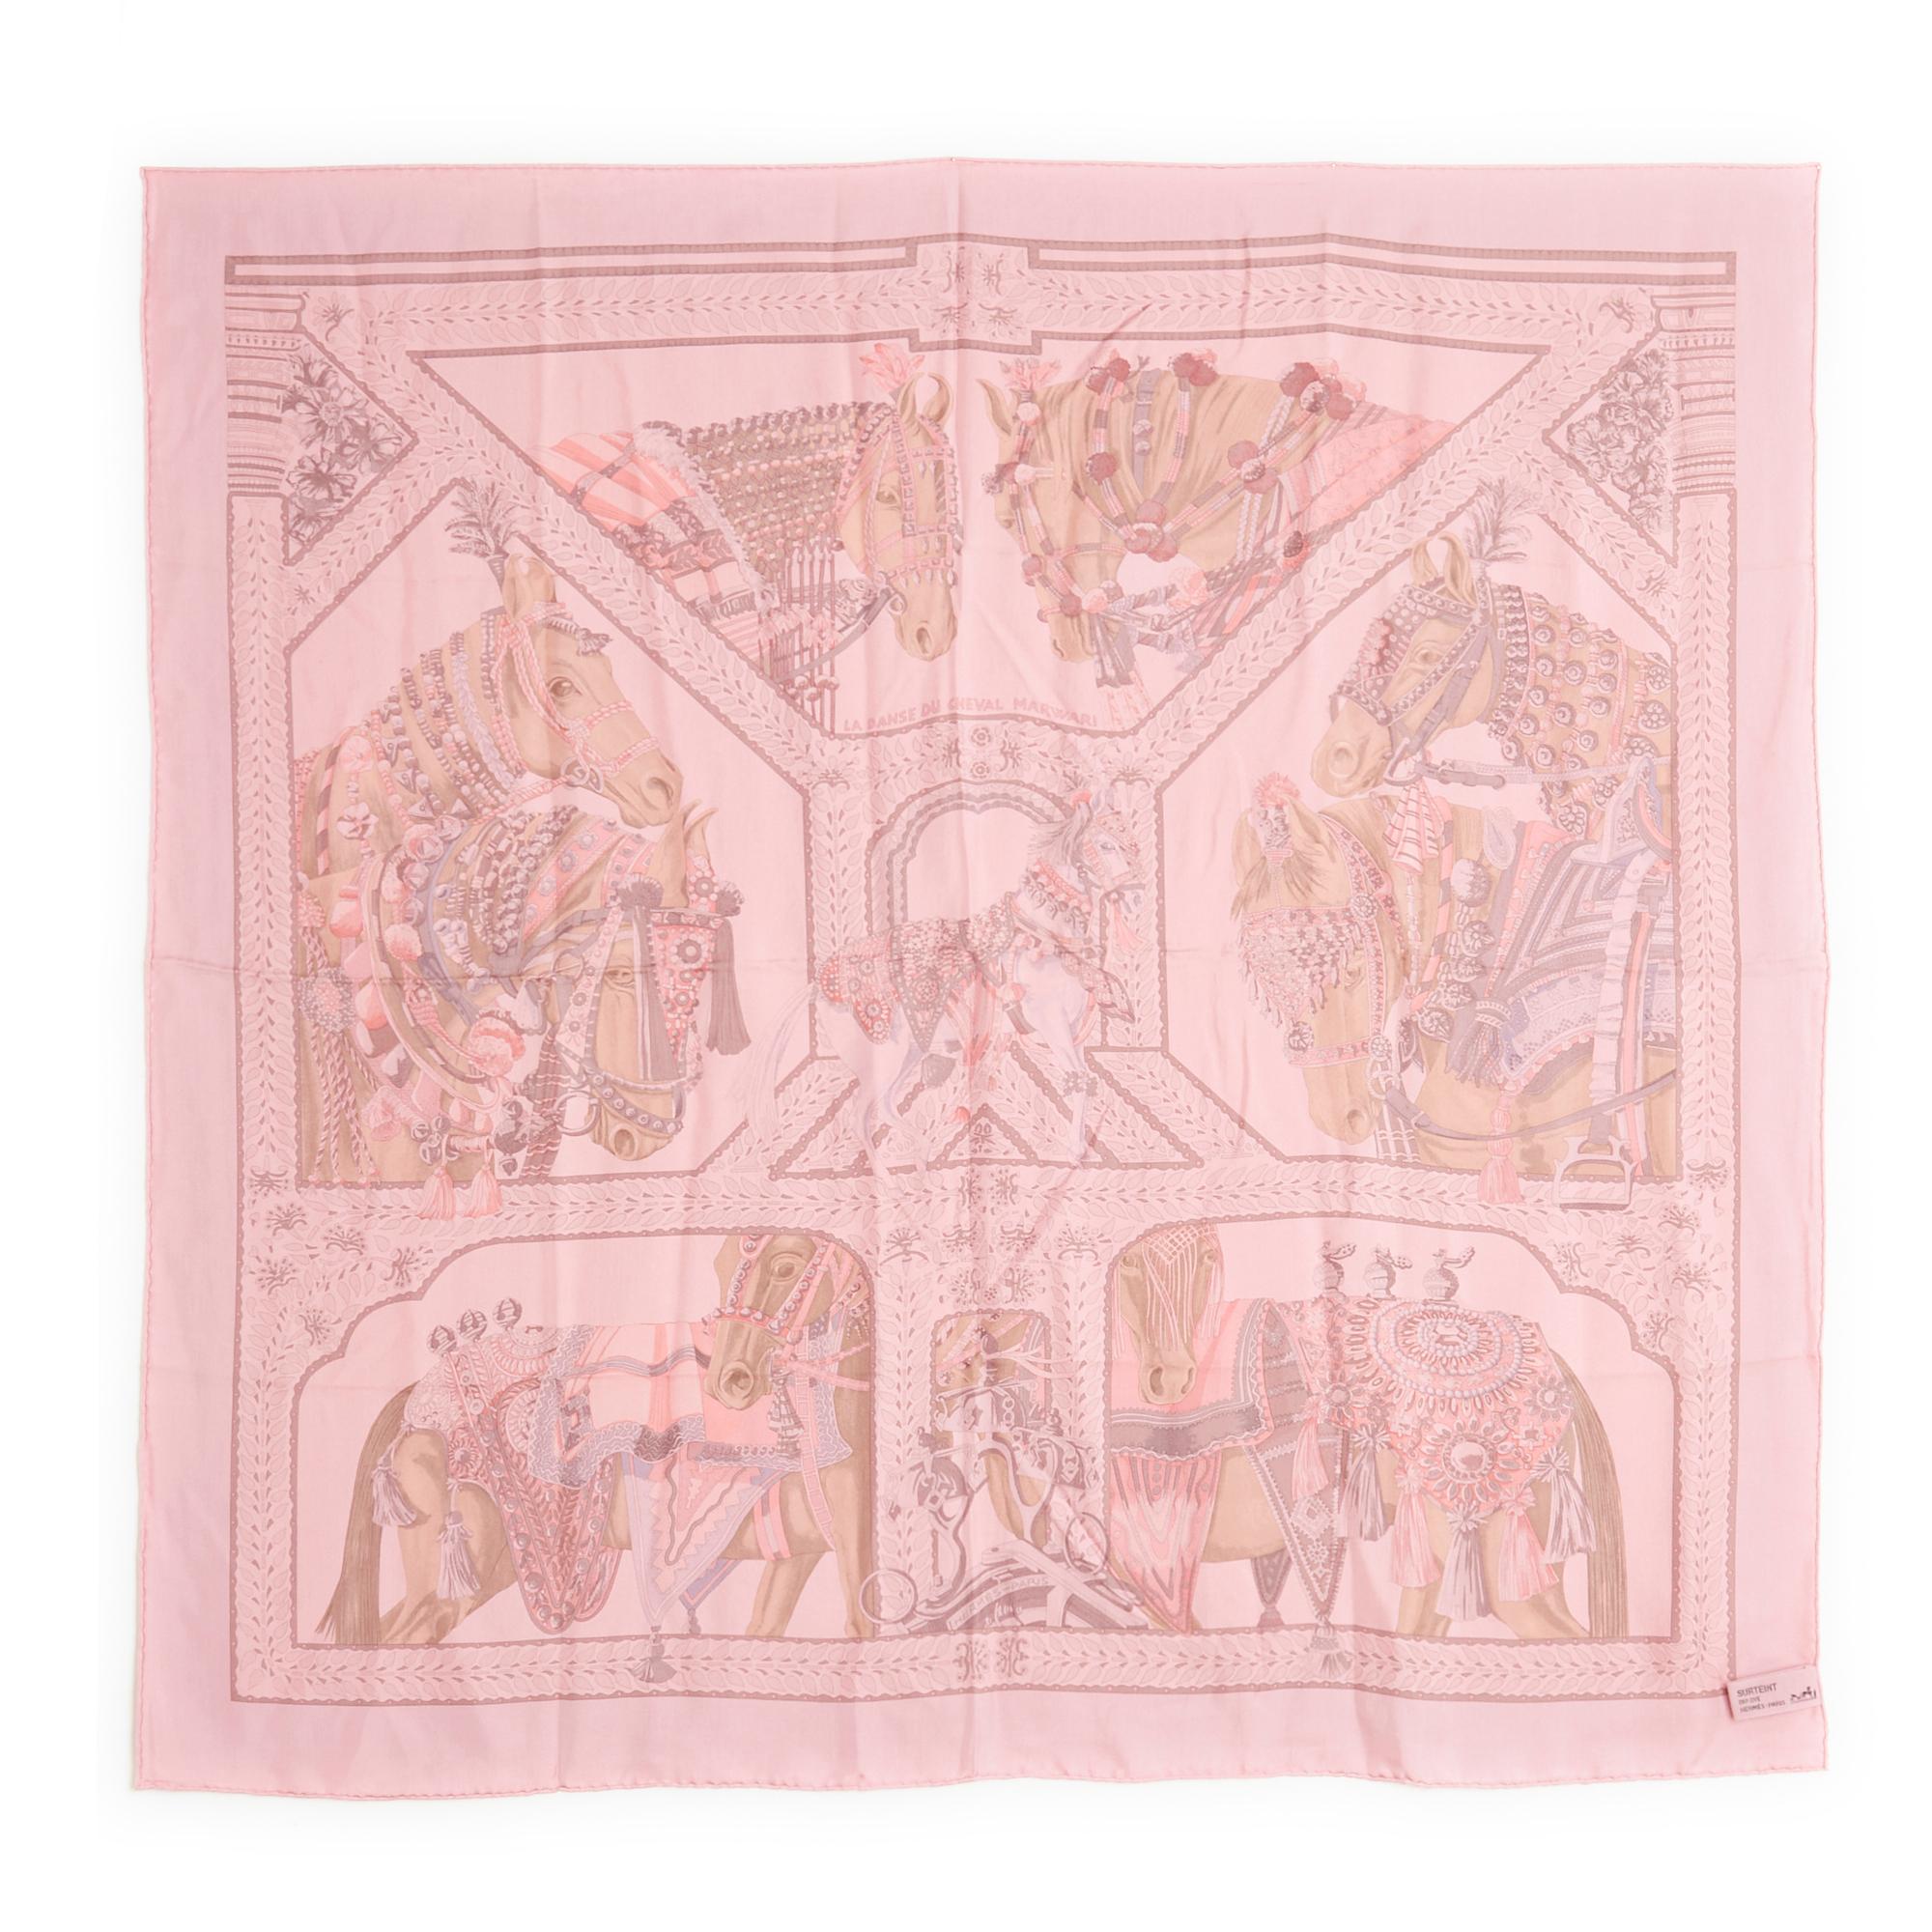 Hermès square 90 scarf in silk twill, La Danse du Cheval Marwari pattern by Annie Faivre, initially published in 2008 and exceptionally reissued in an overdyed or pink Dip Dye version in 2014. Width 90 cm x length approximately 90 cm. The square